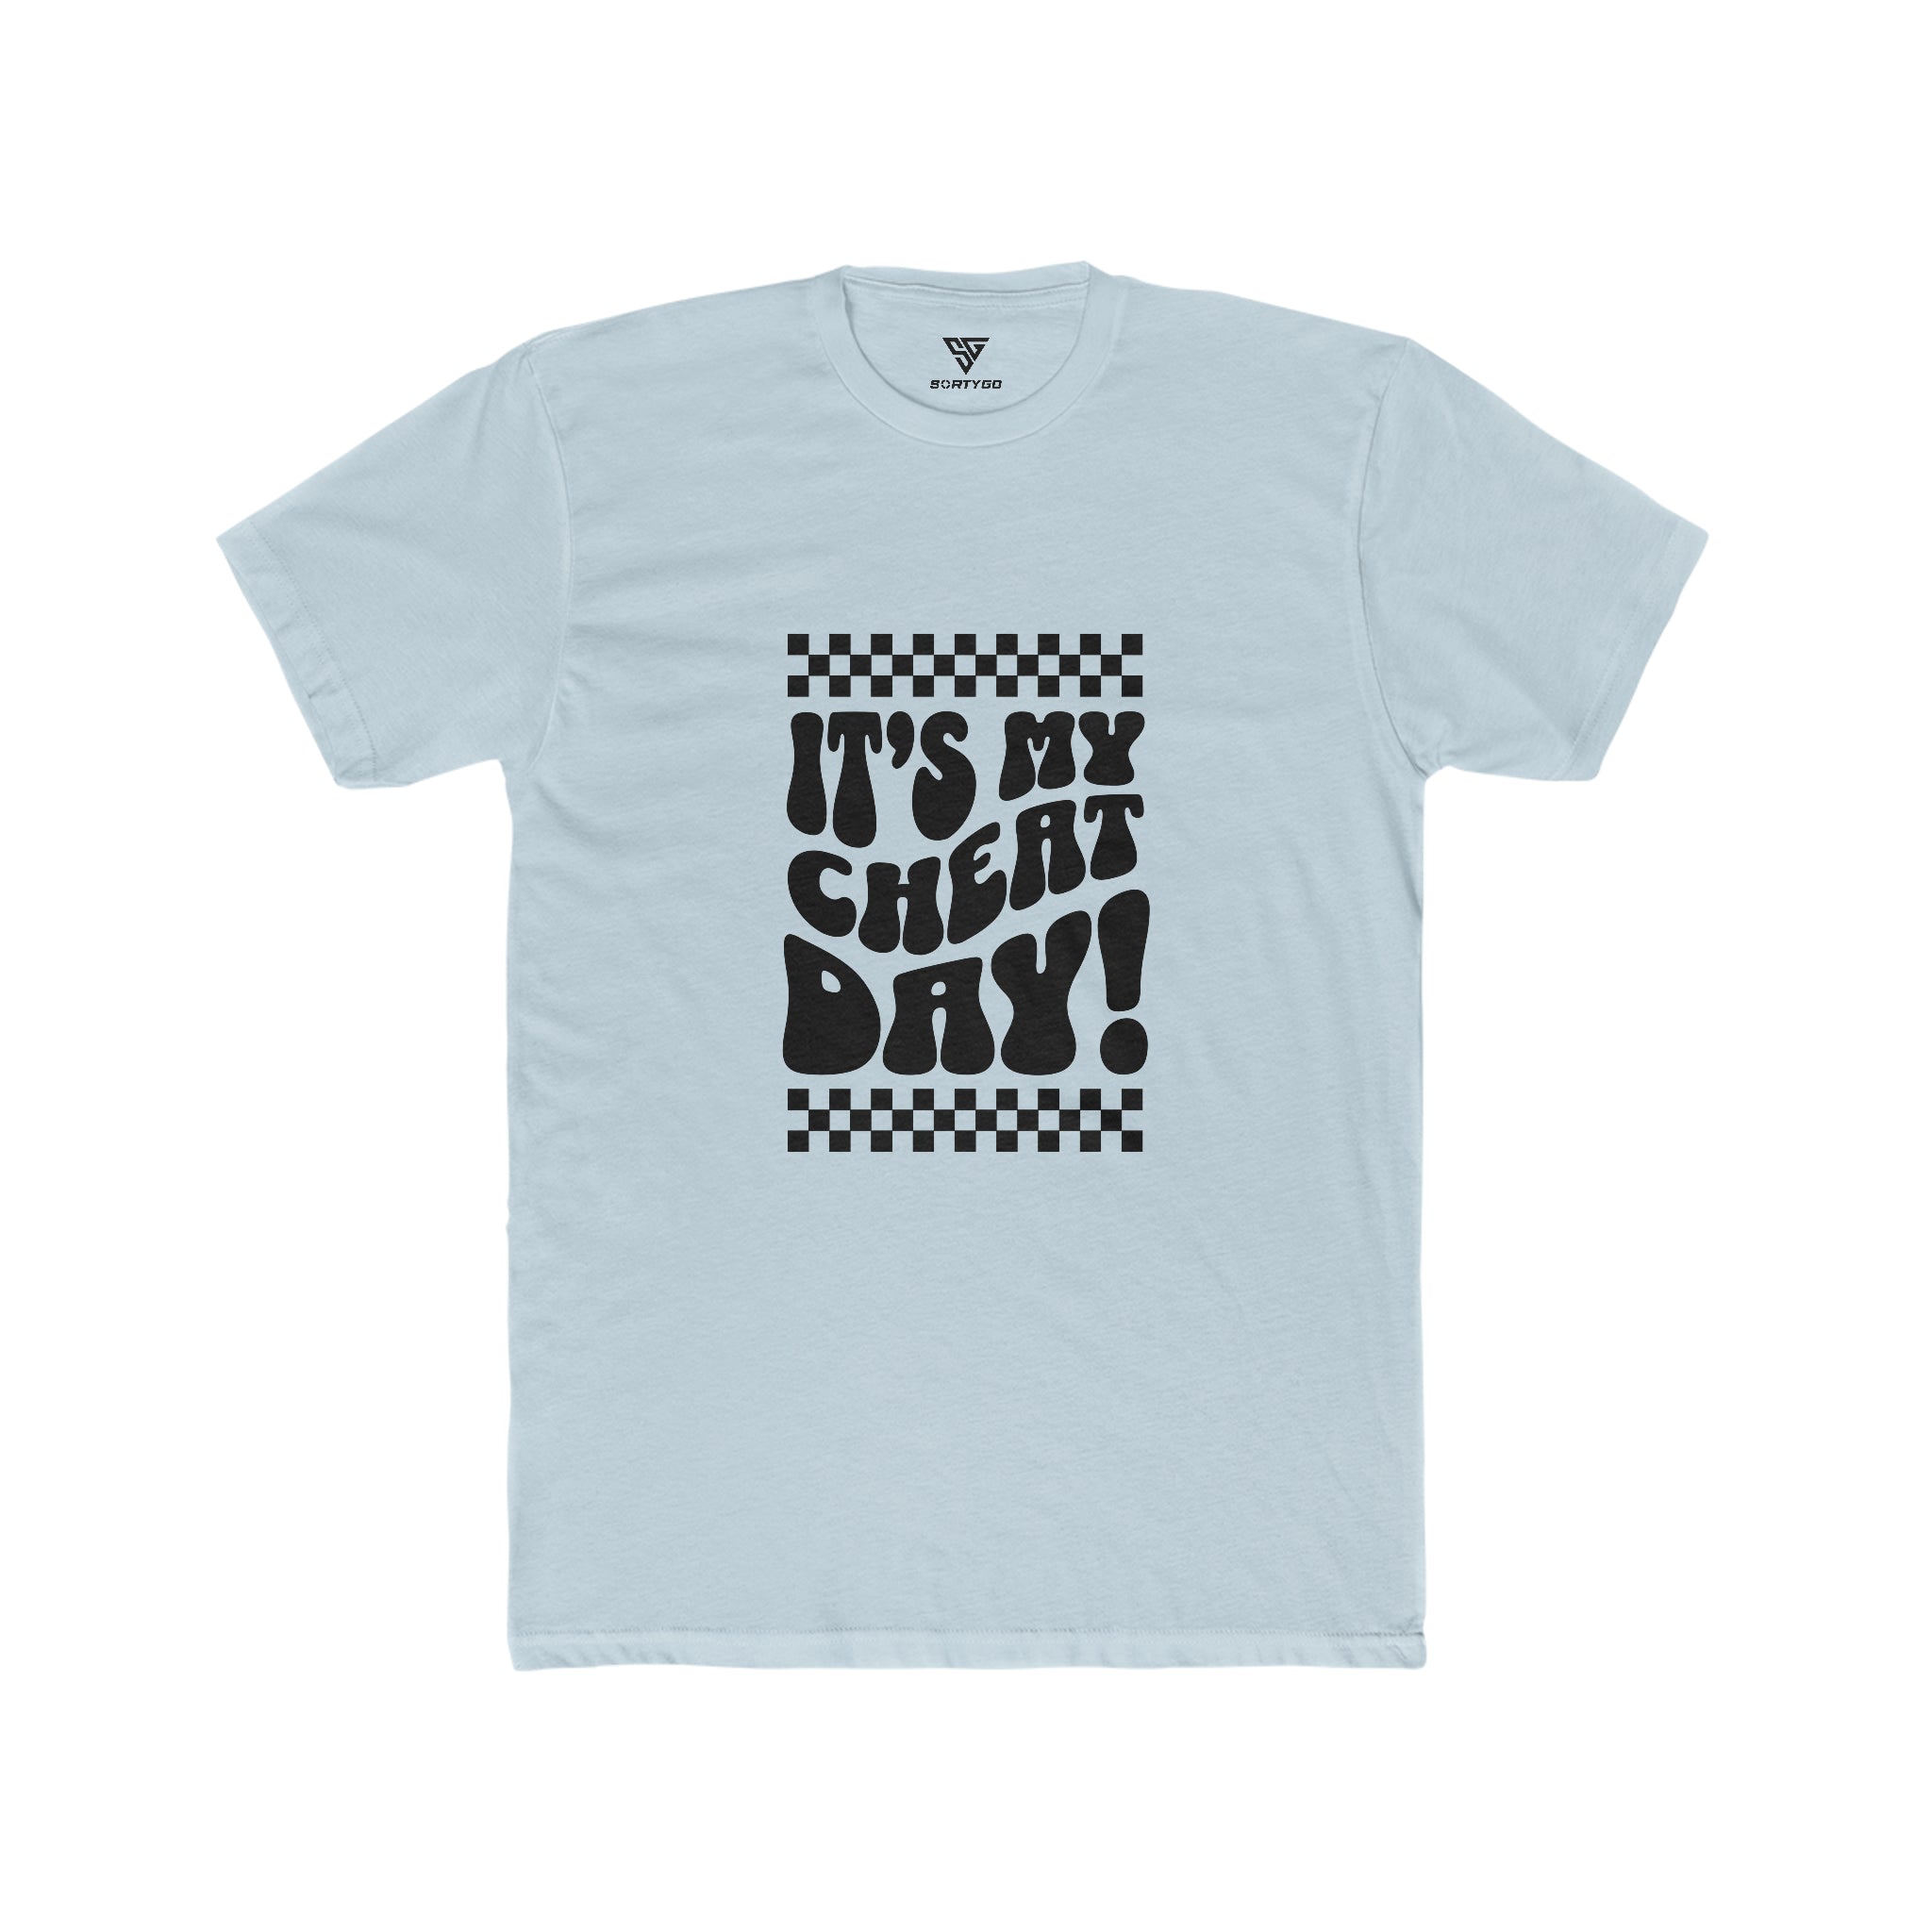 SORTYGO - It‘s my Cheat Day Men Fitted T-Shirt in Solid Light Blue